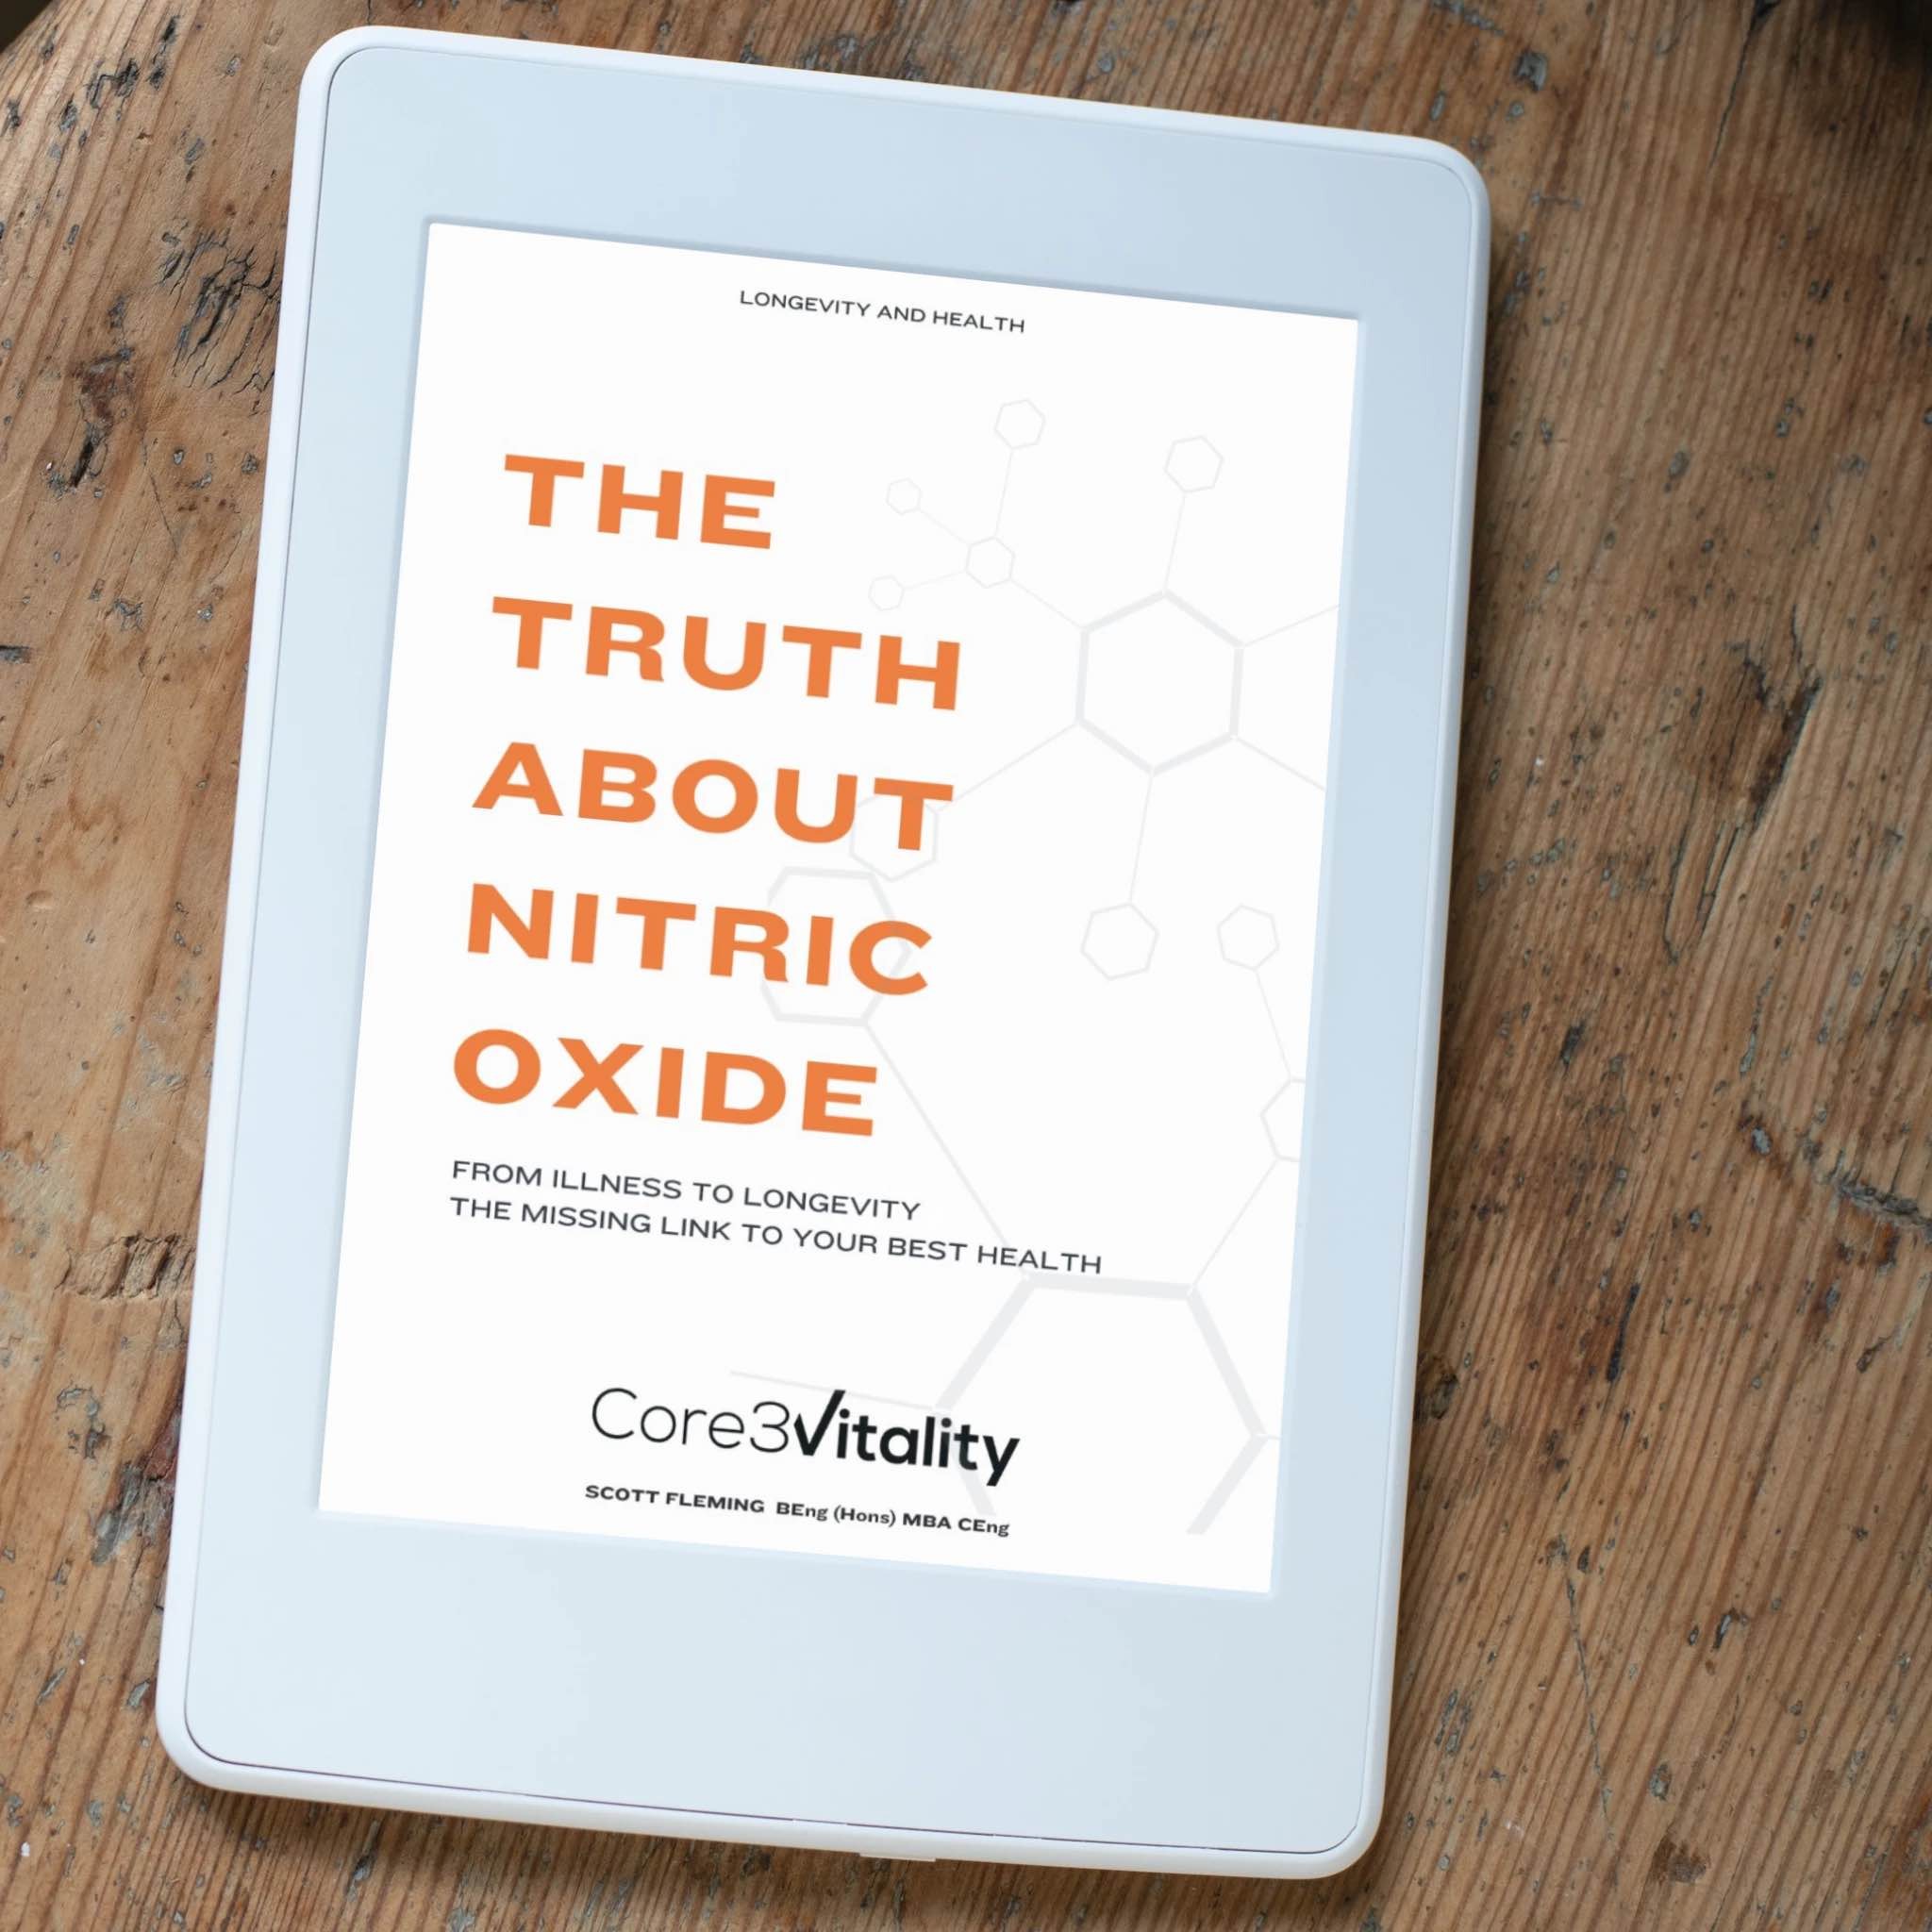 e reader on table with The Truth About Nitric Oxide 400 showing on cover